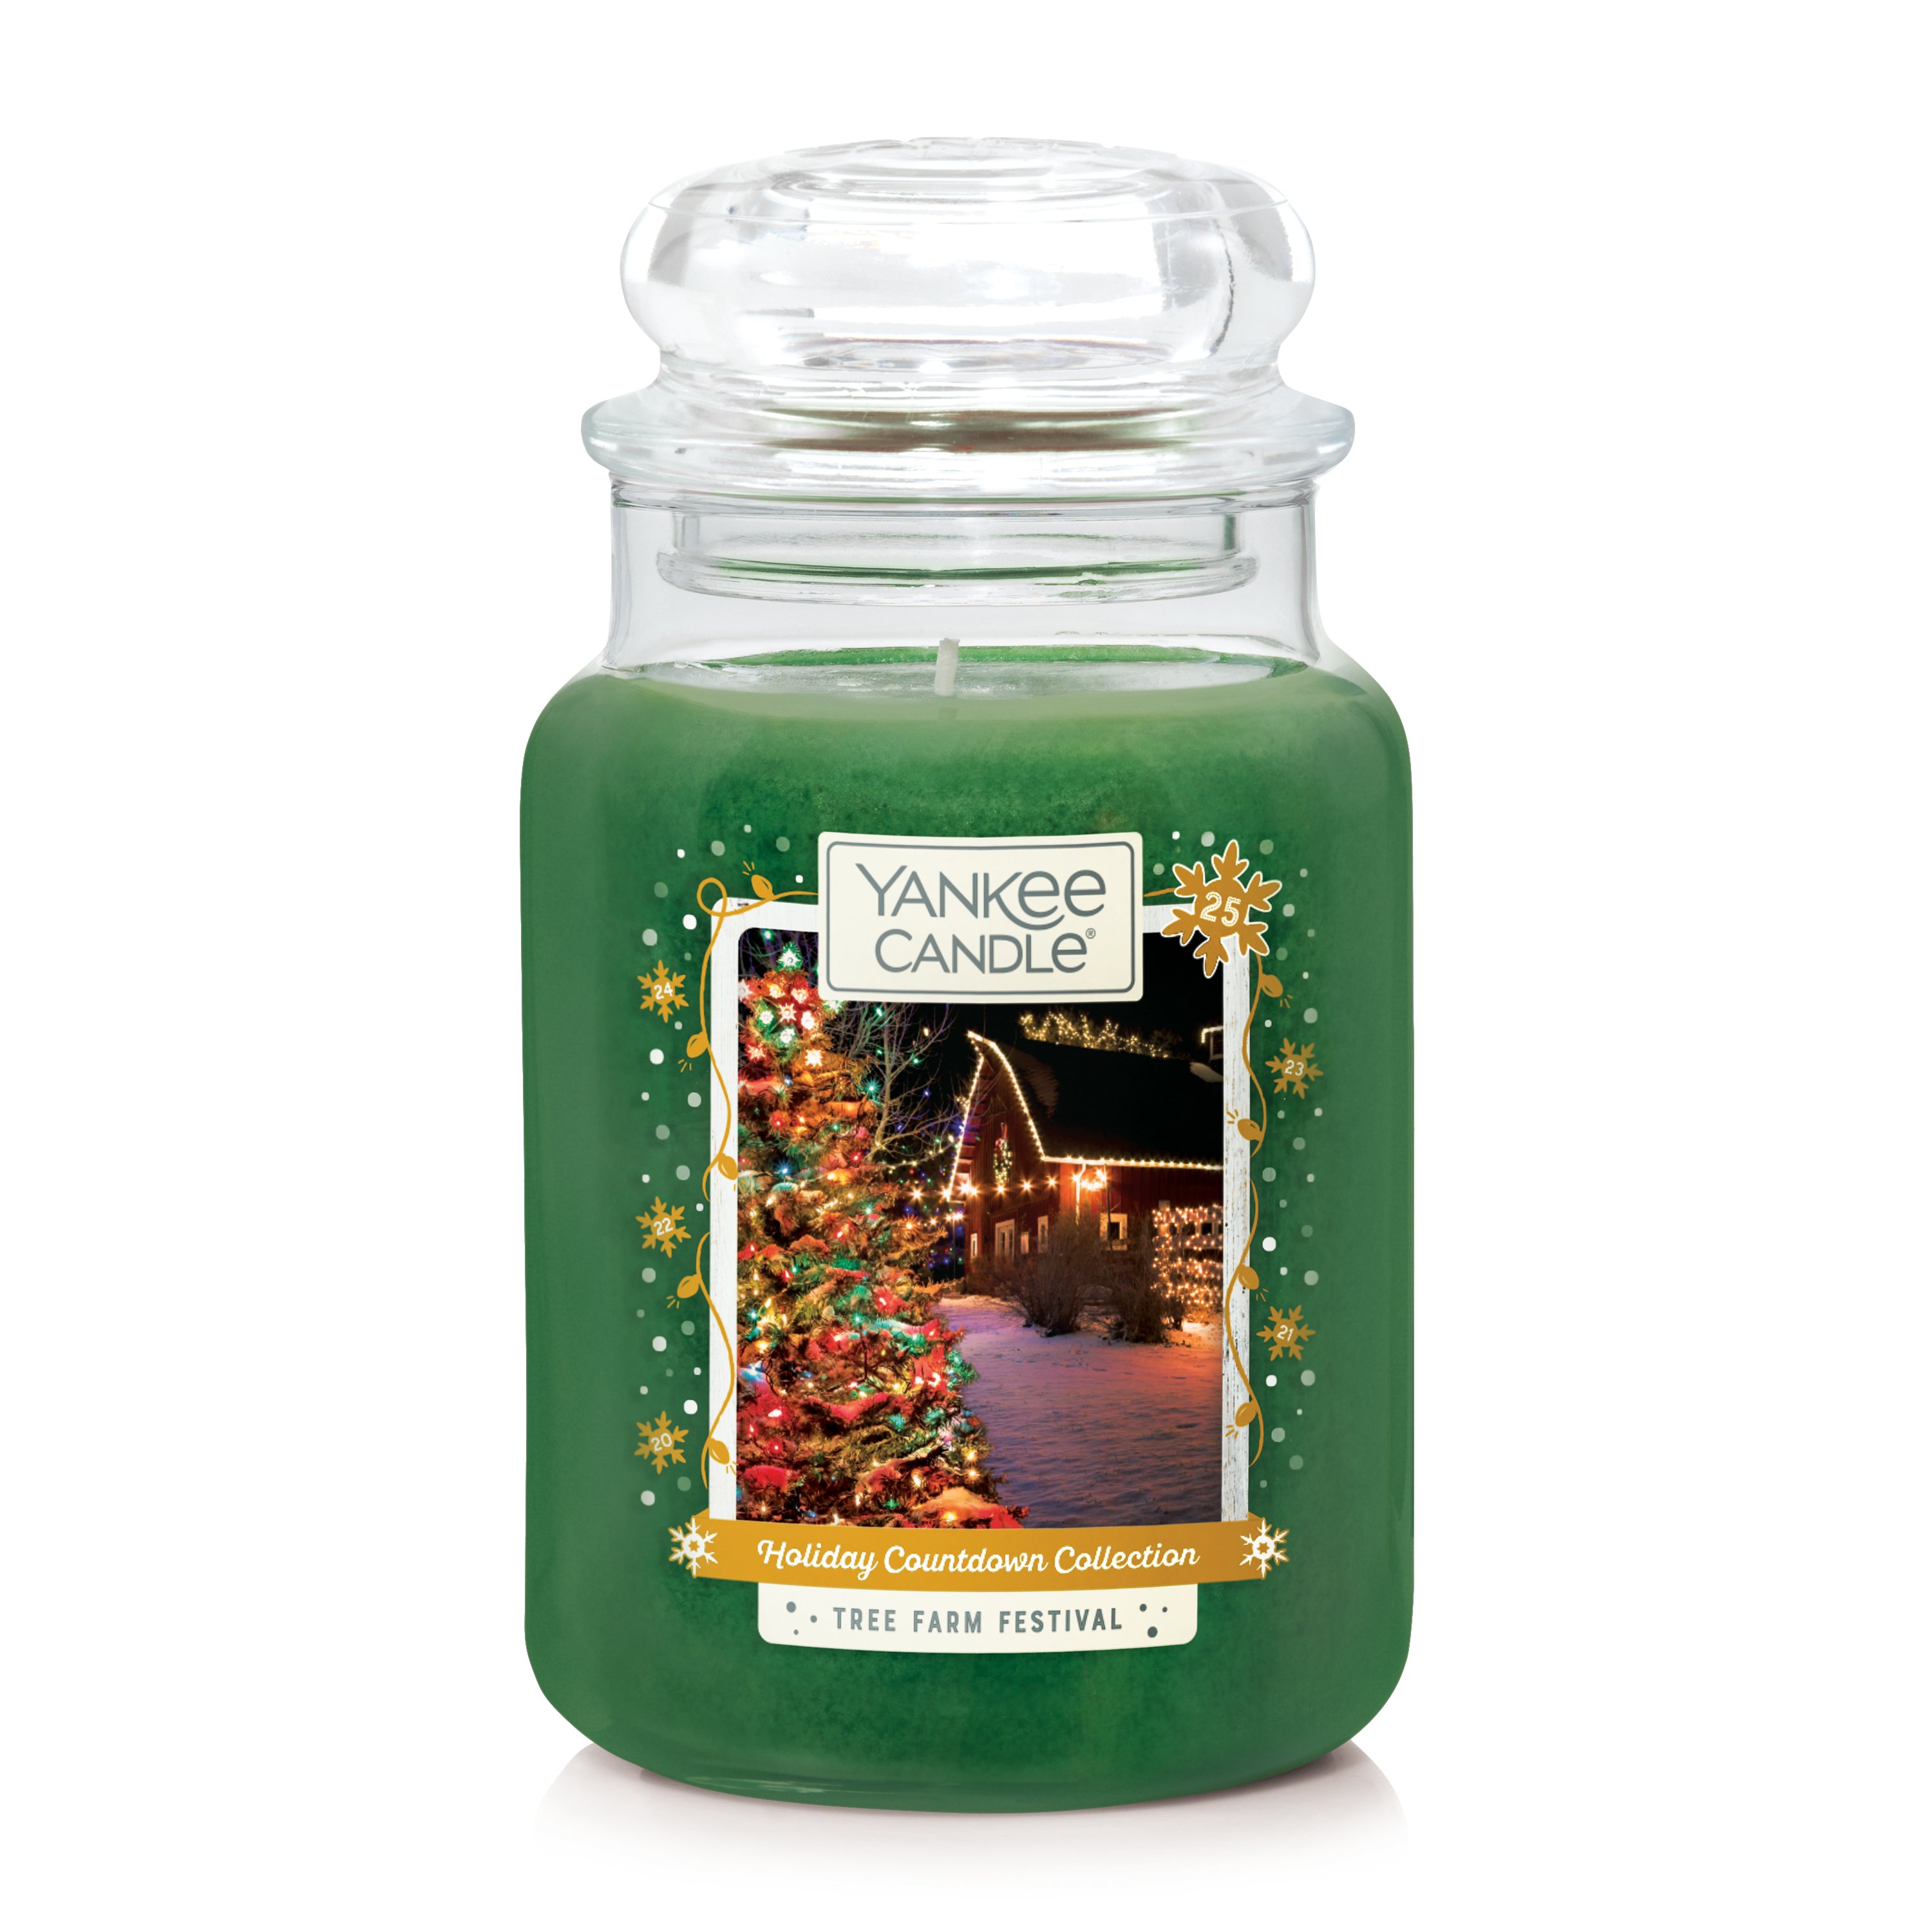 Yankee Candle Balsam & Cedar Wax Melts, 3 Packs of 6 (18 Total), Christmas  | Holiday Candle